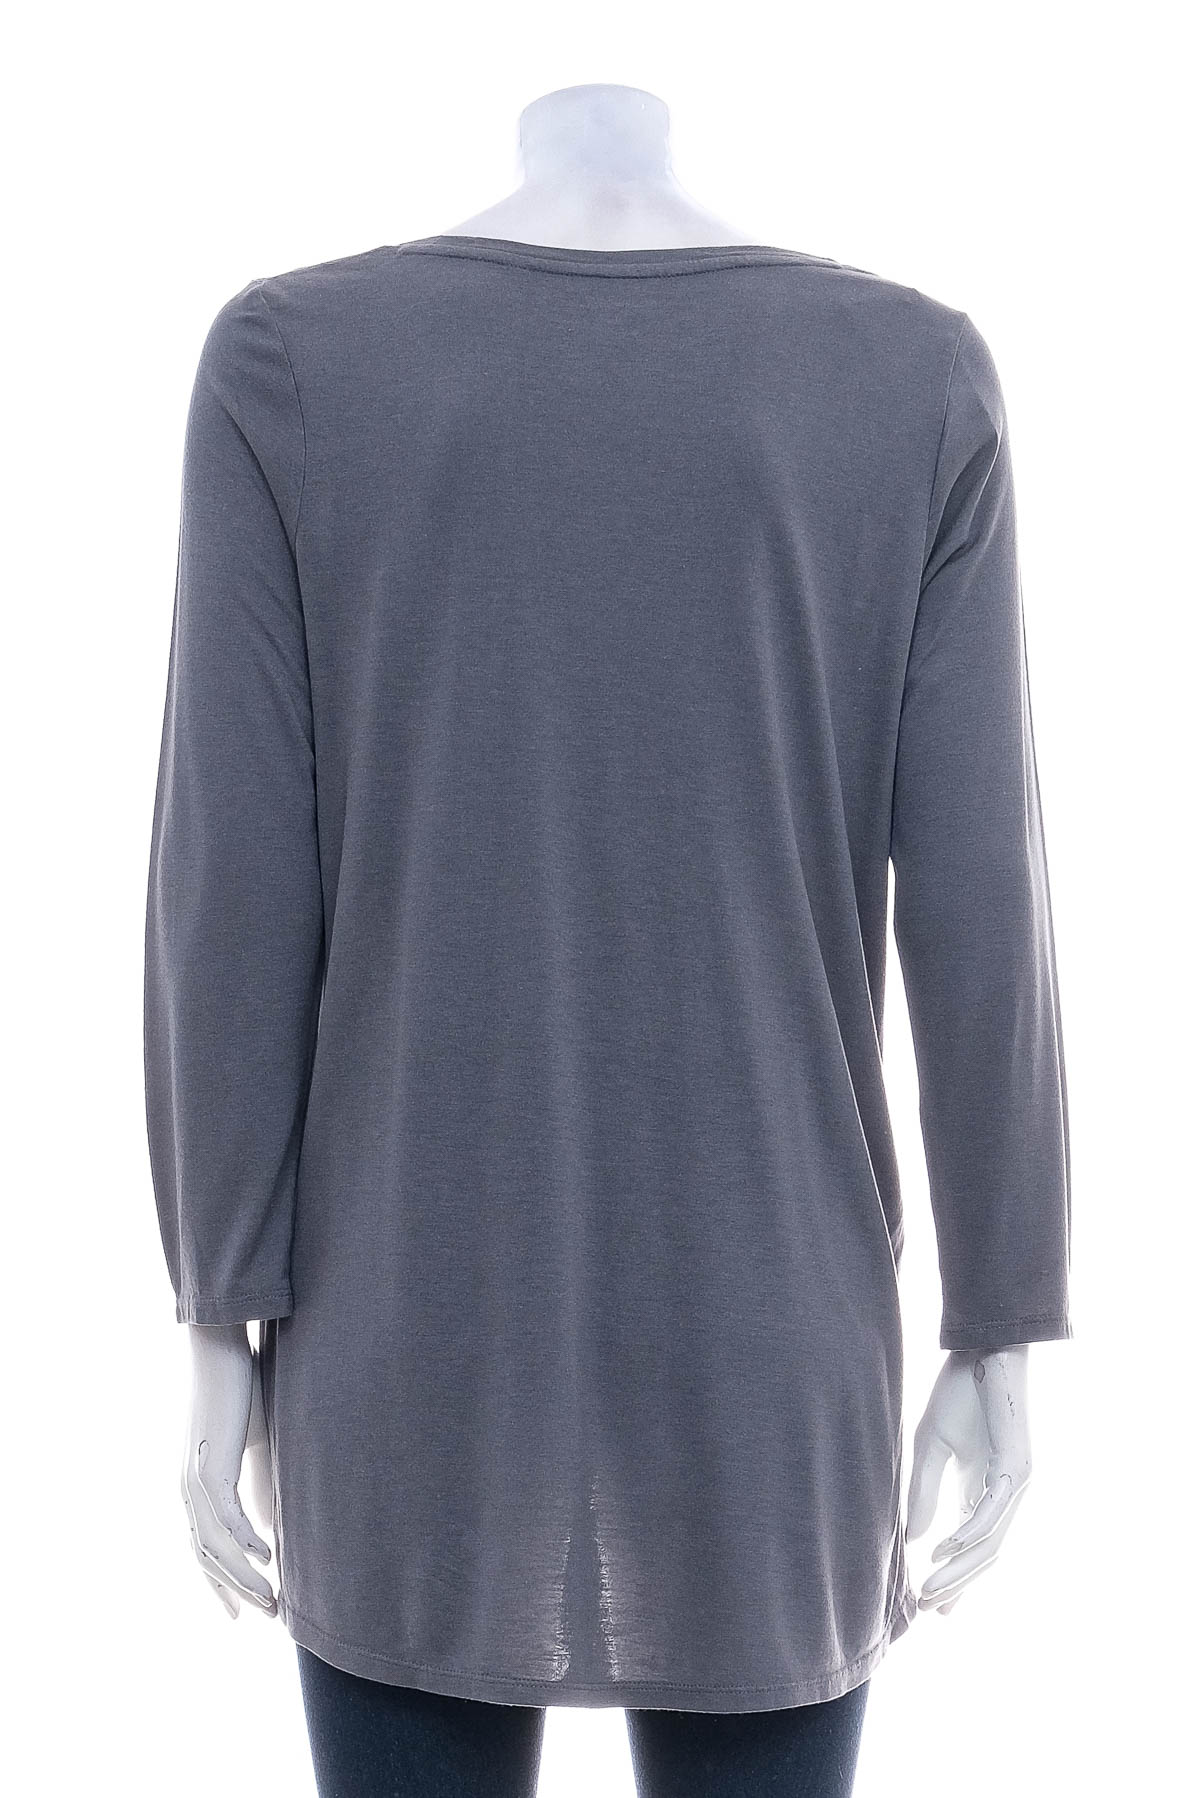 Women's blouse - New Directions - 1